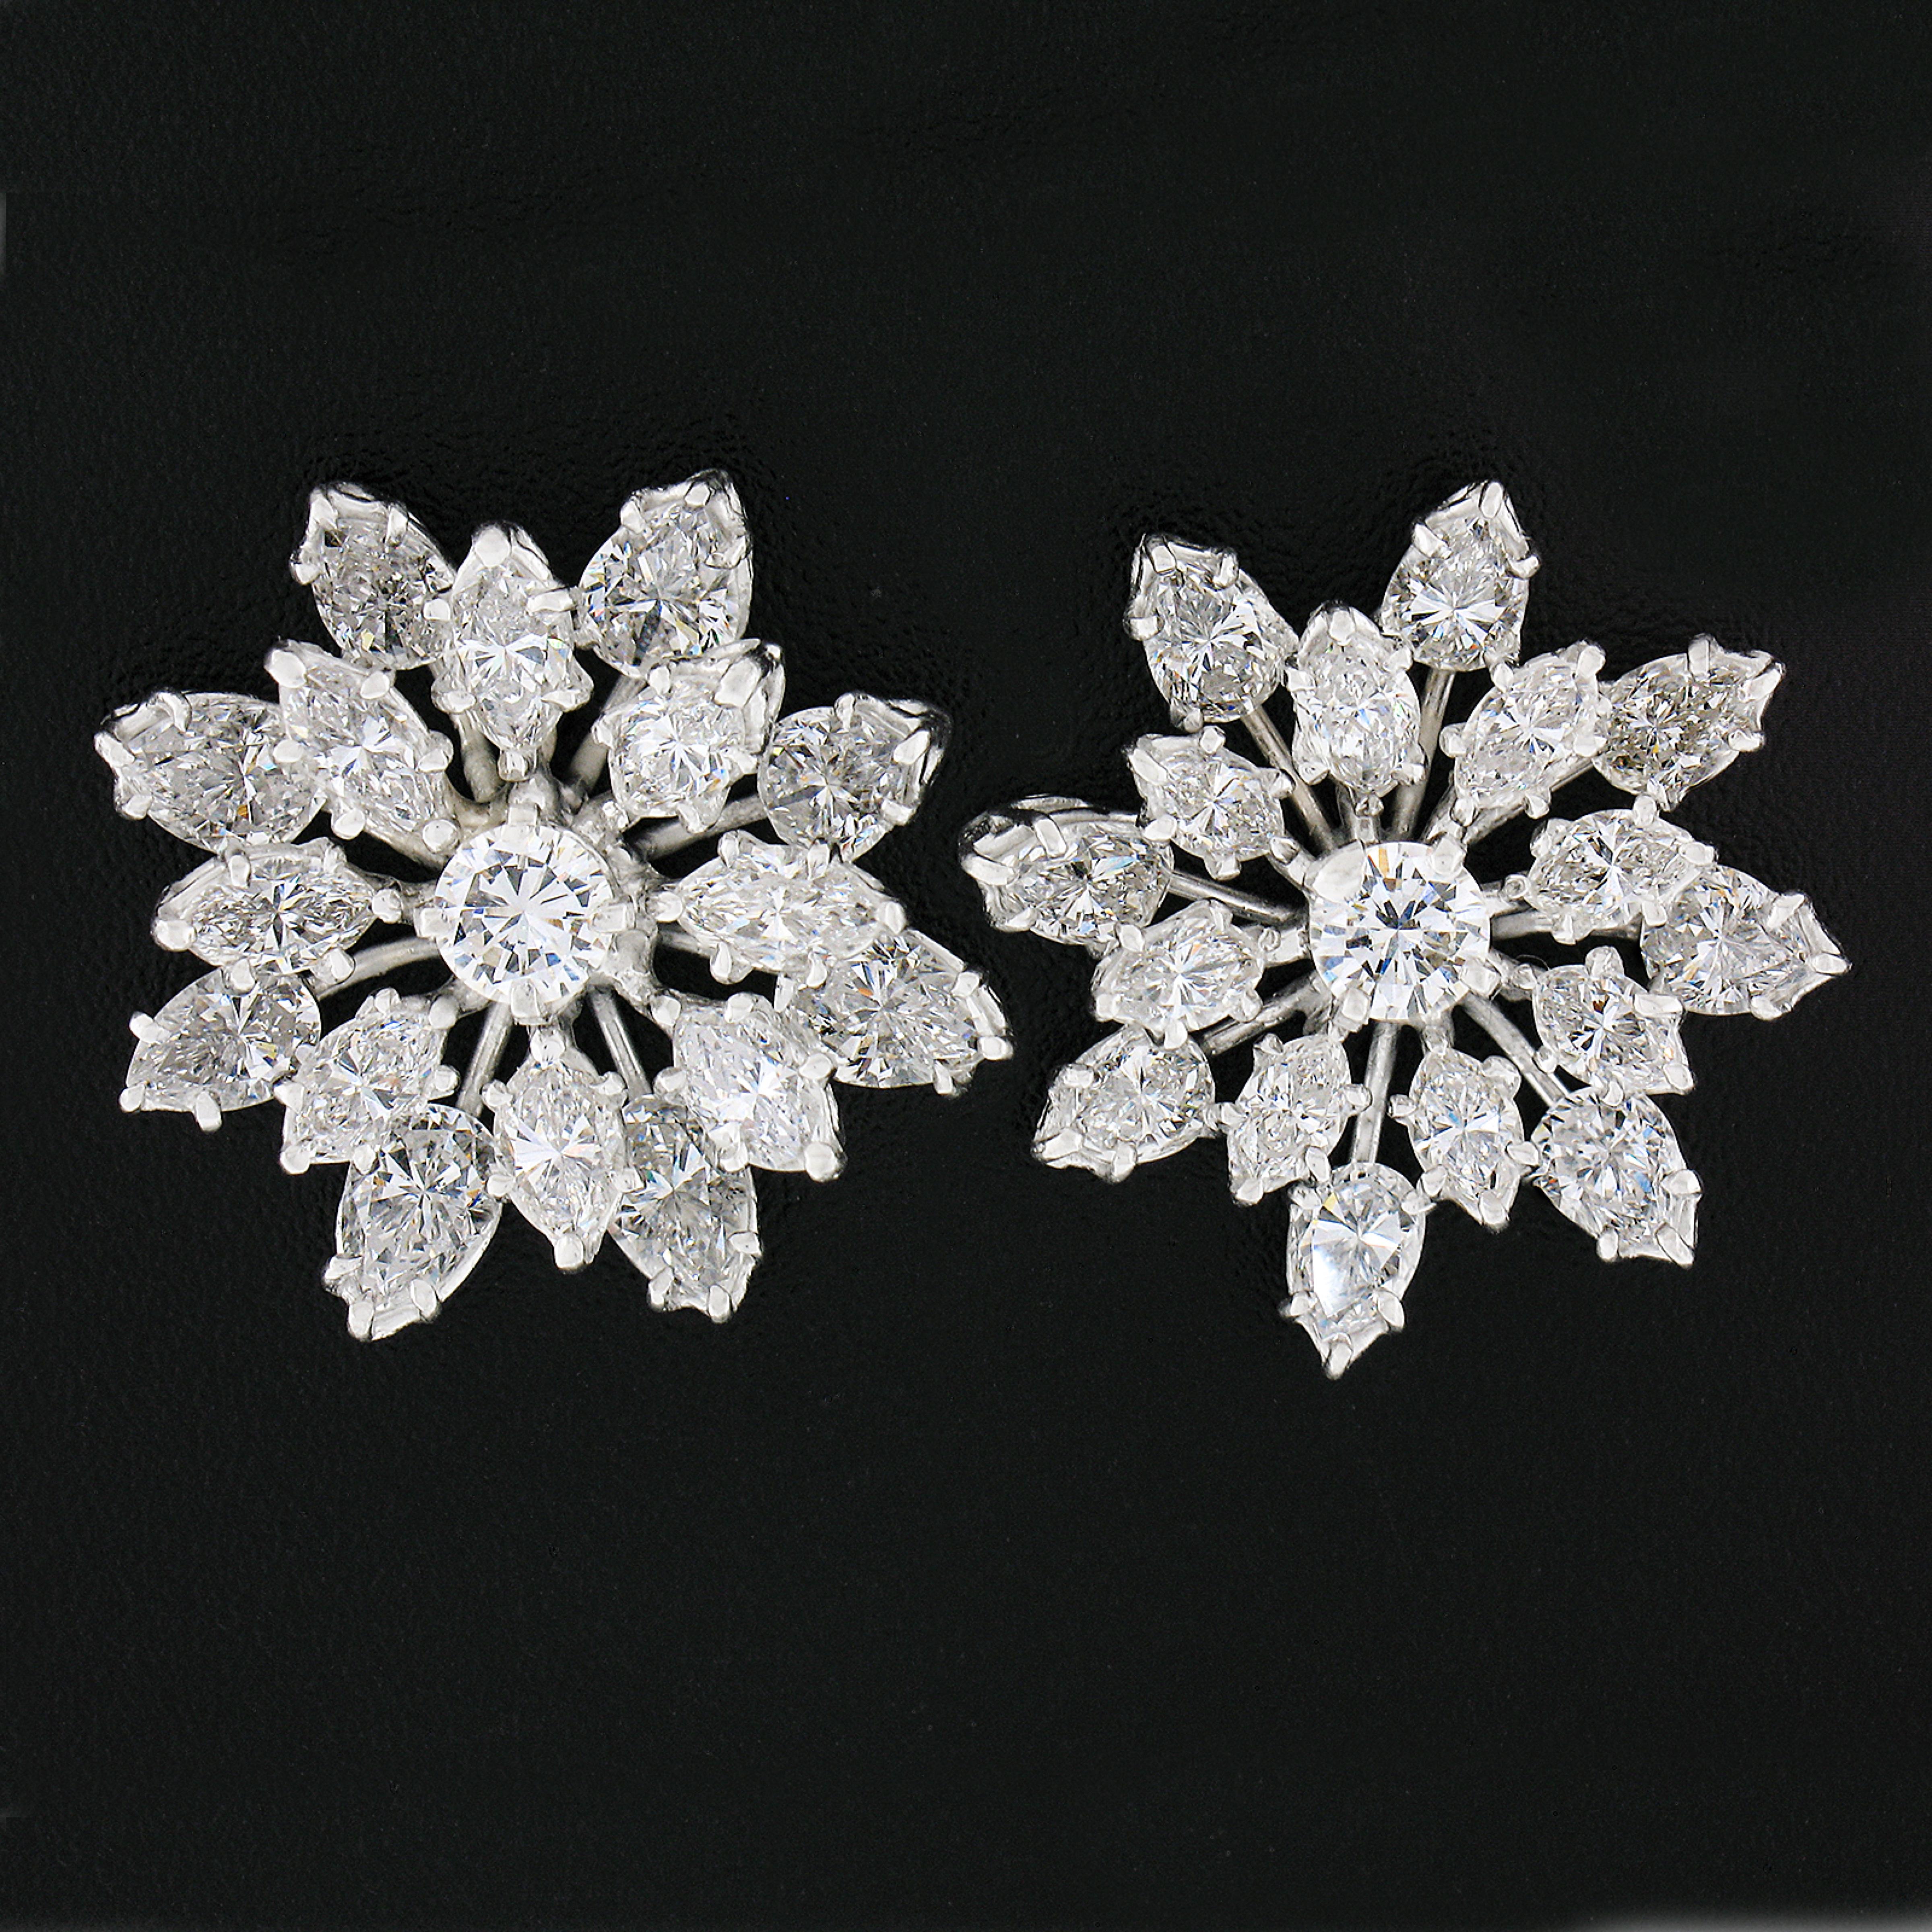 Here we have a jaw dropping pair of vintage earrings crafted from solid platinum featuring a magnificent snowflake spray design drenched with approximately 4.84 carats of super fine quality diamonds throughout. The prong set stones sit in individual